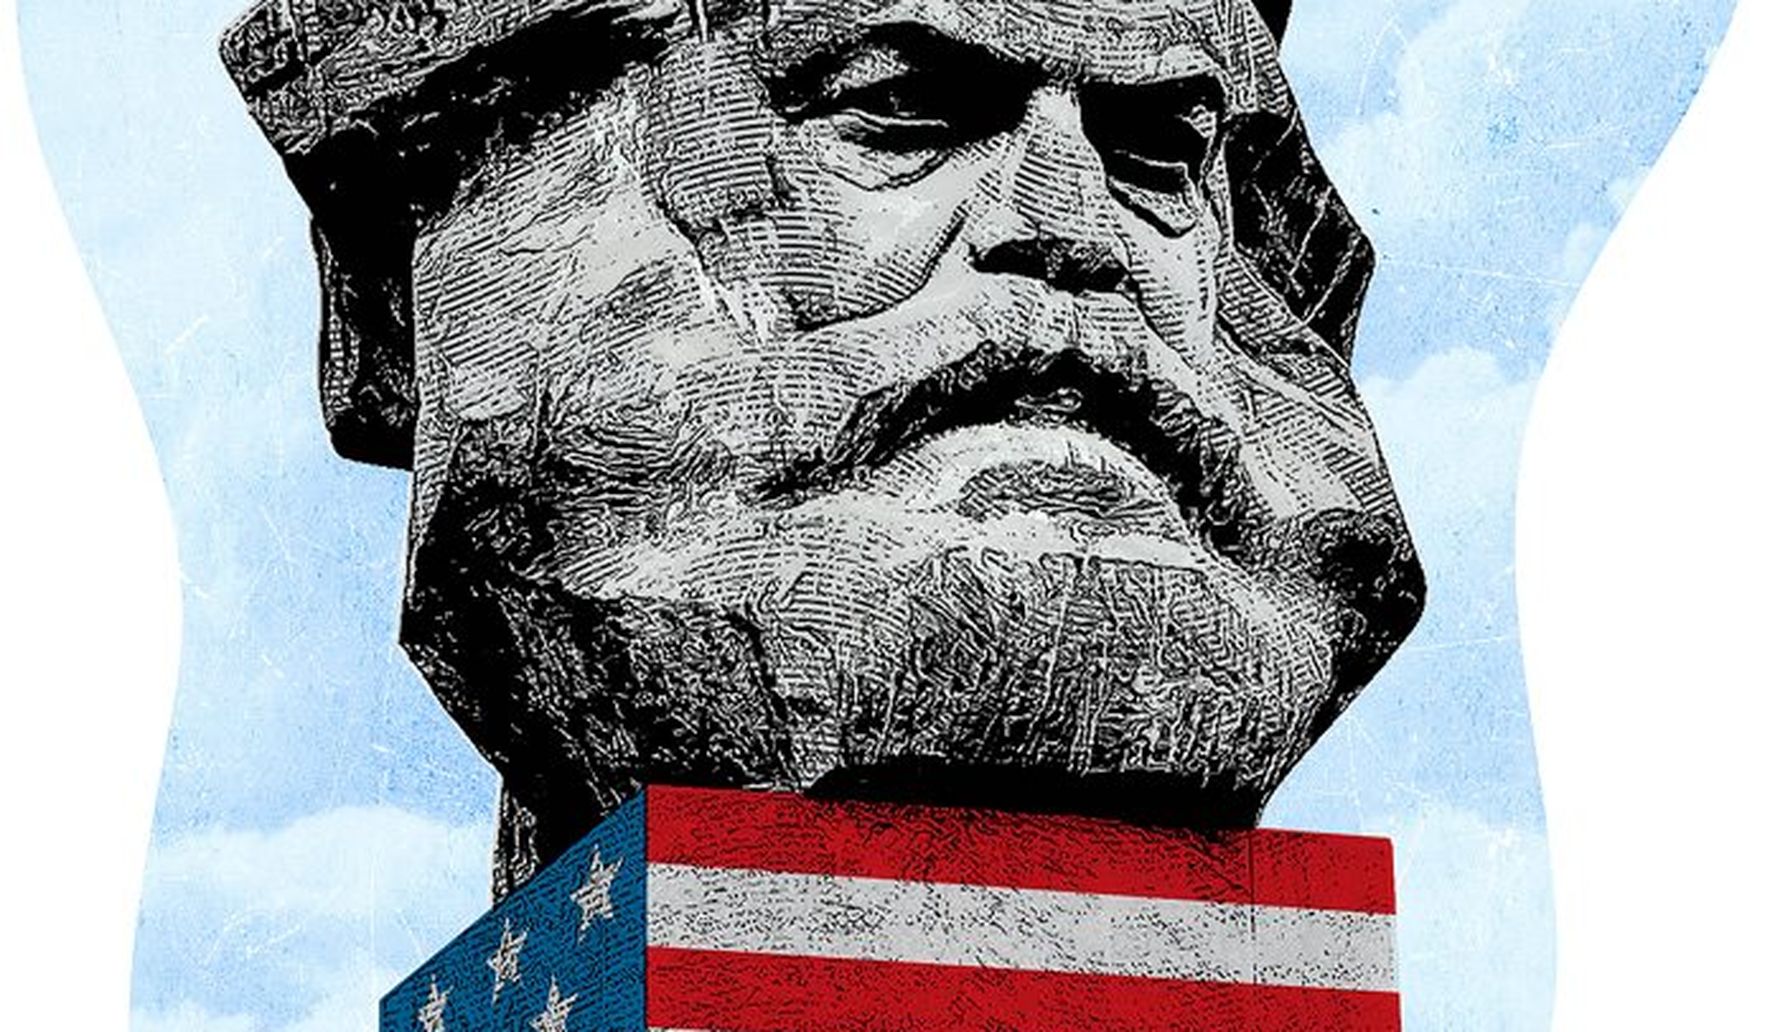 The Cultural Marxist attack on Western society - Washington Times